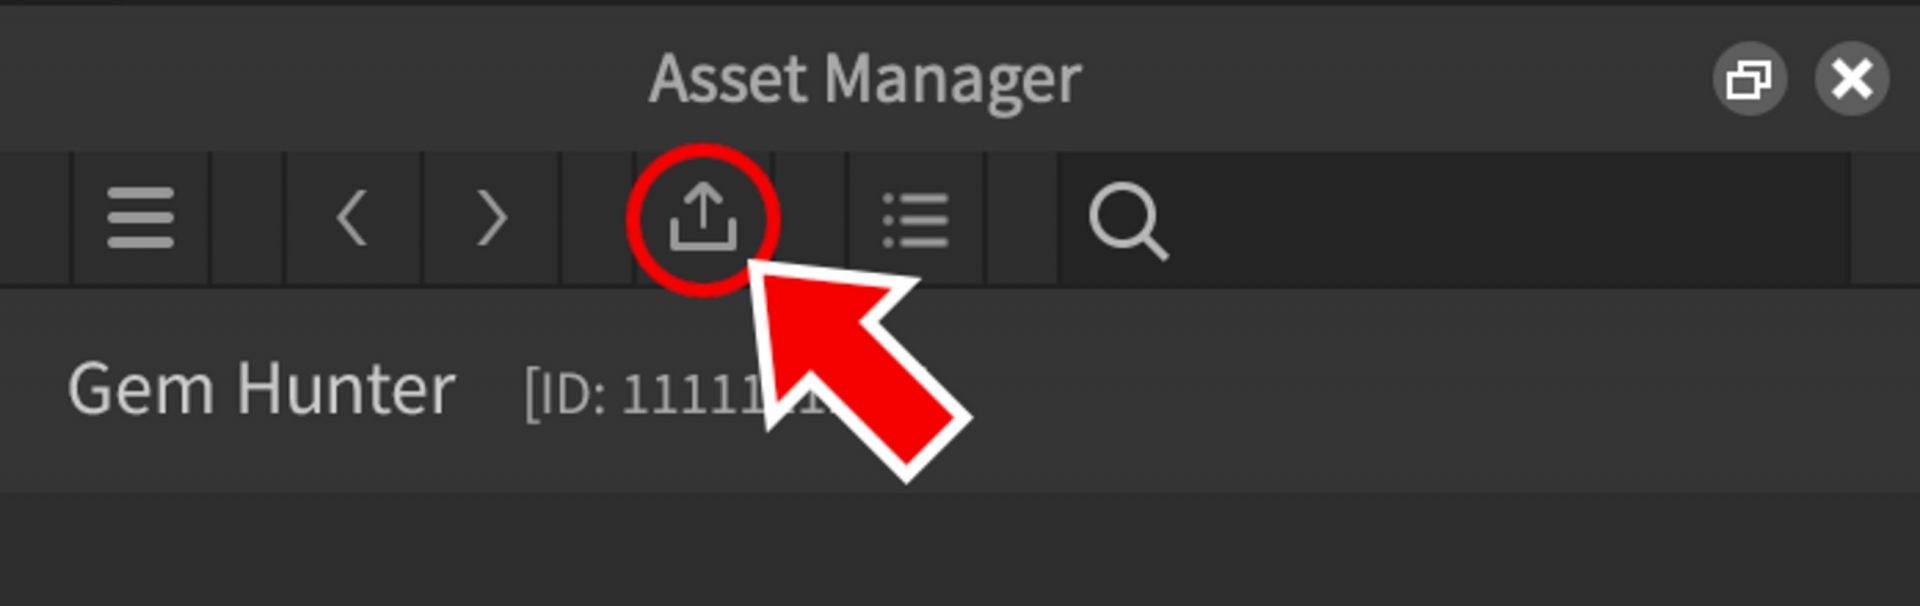 Importing in the Asset Manager (Image via Roblox)